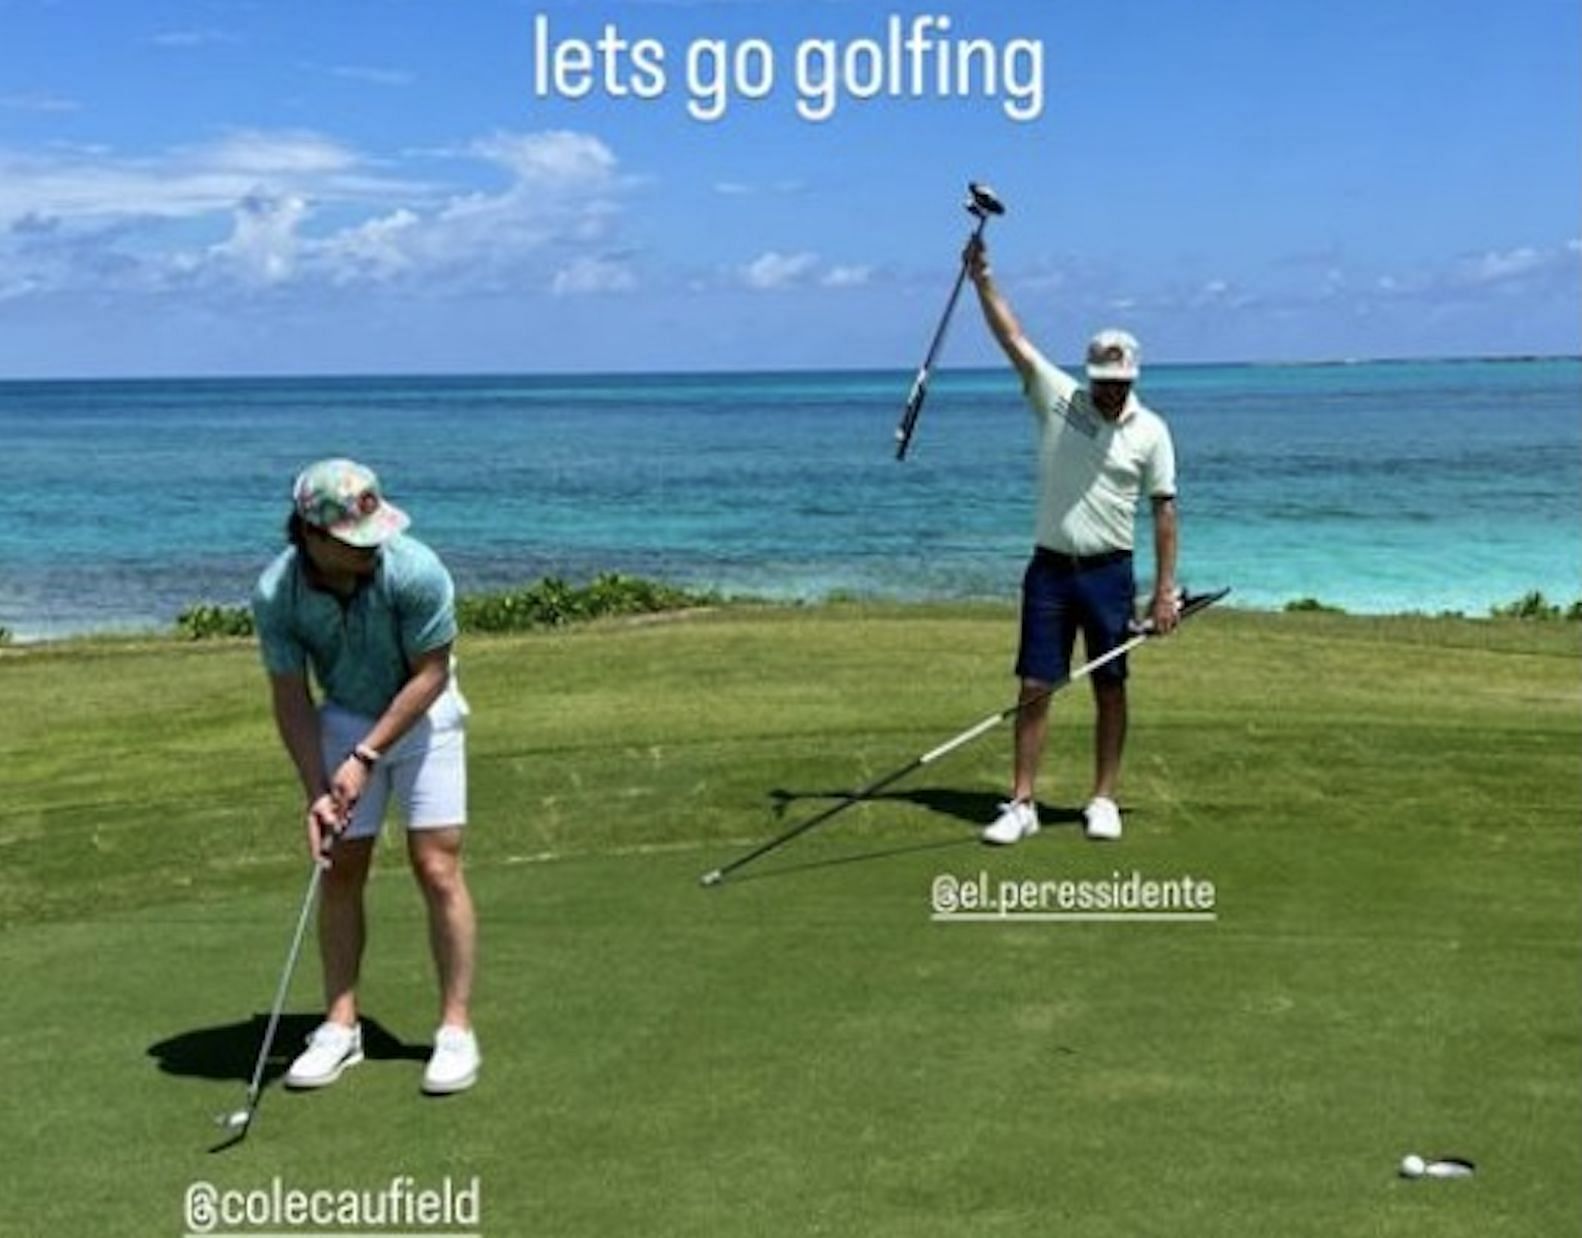 Montreal Canadiens stars Nick Suzuki, Cole Caufield golf together in Paradise Island golf course